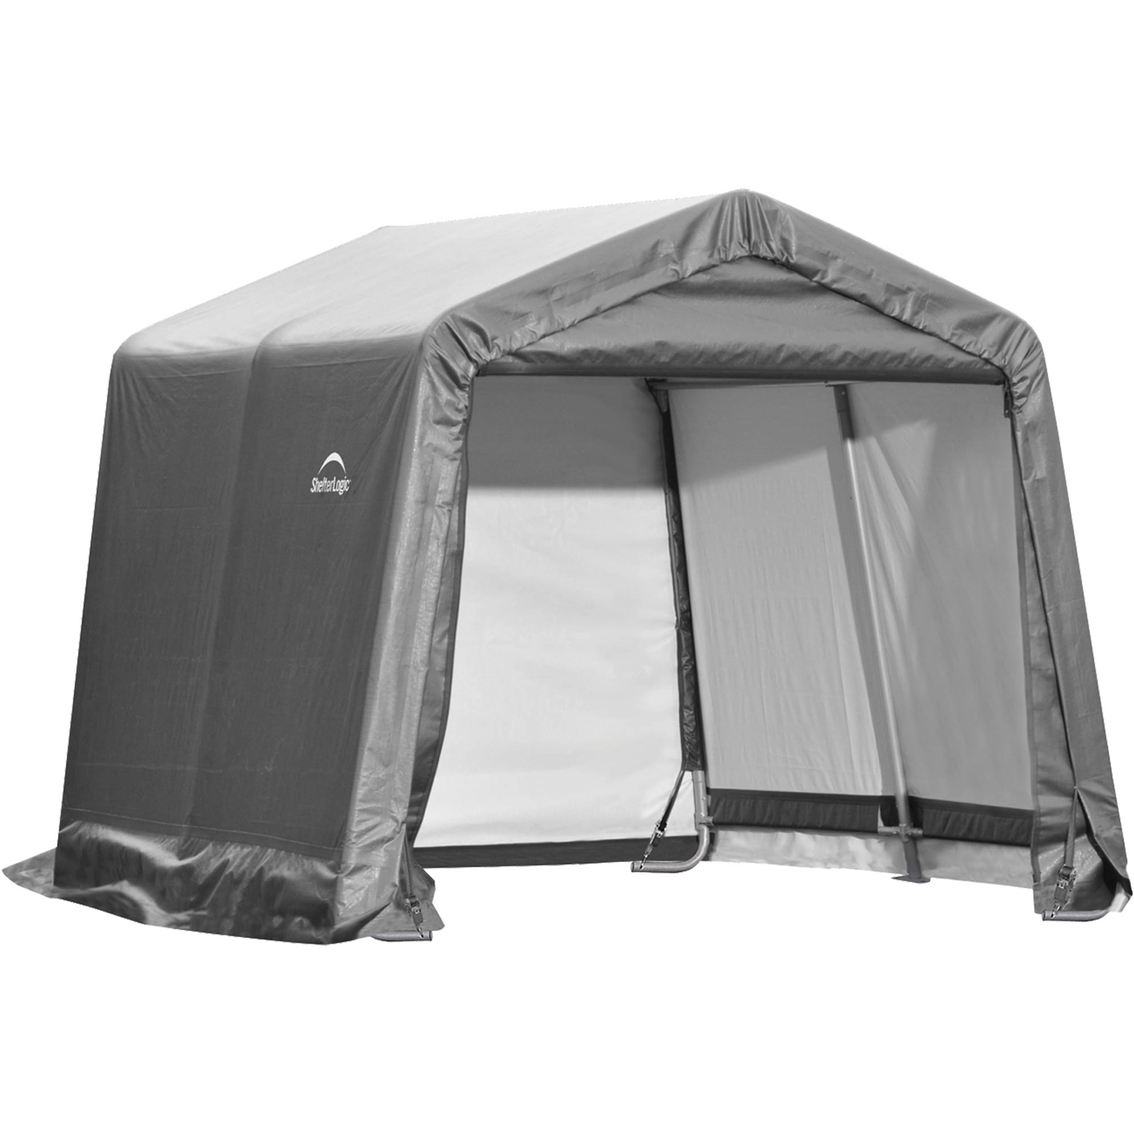 ShelterLogic 10 x 10 x 8 ft. Shed-in-a-Box - Image 1 of 3